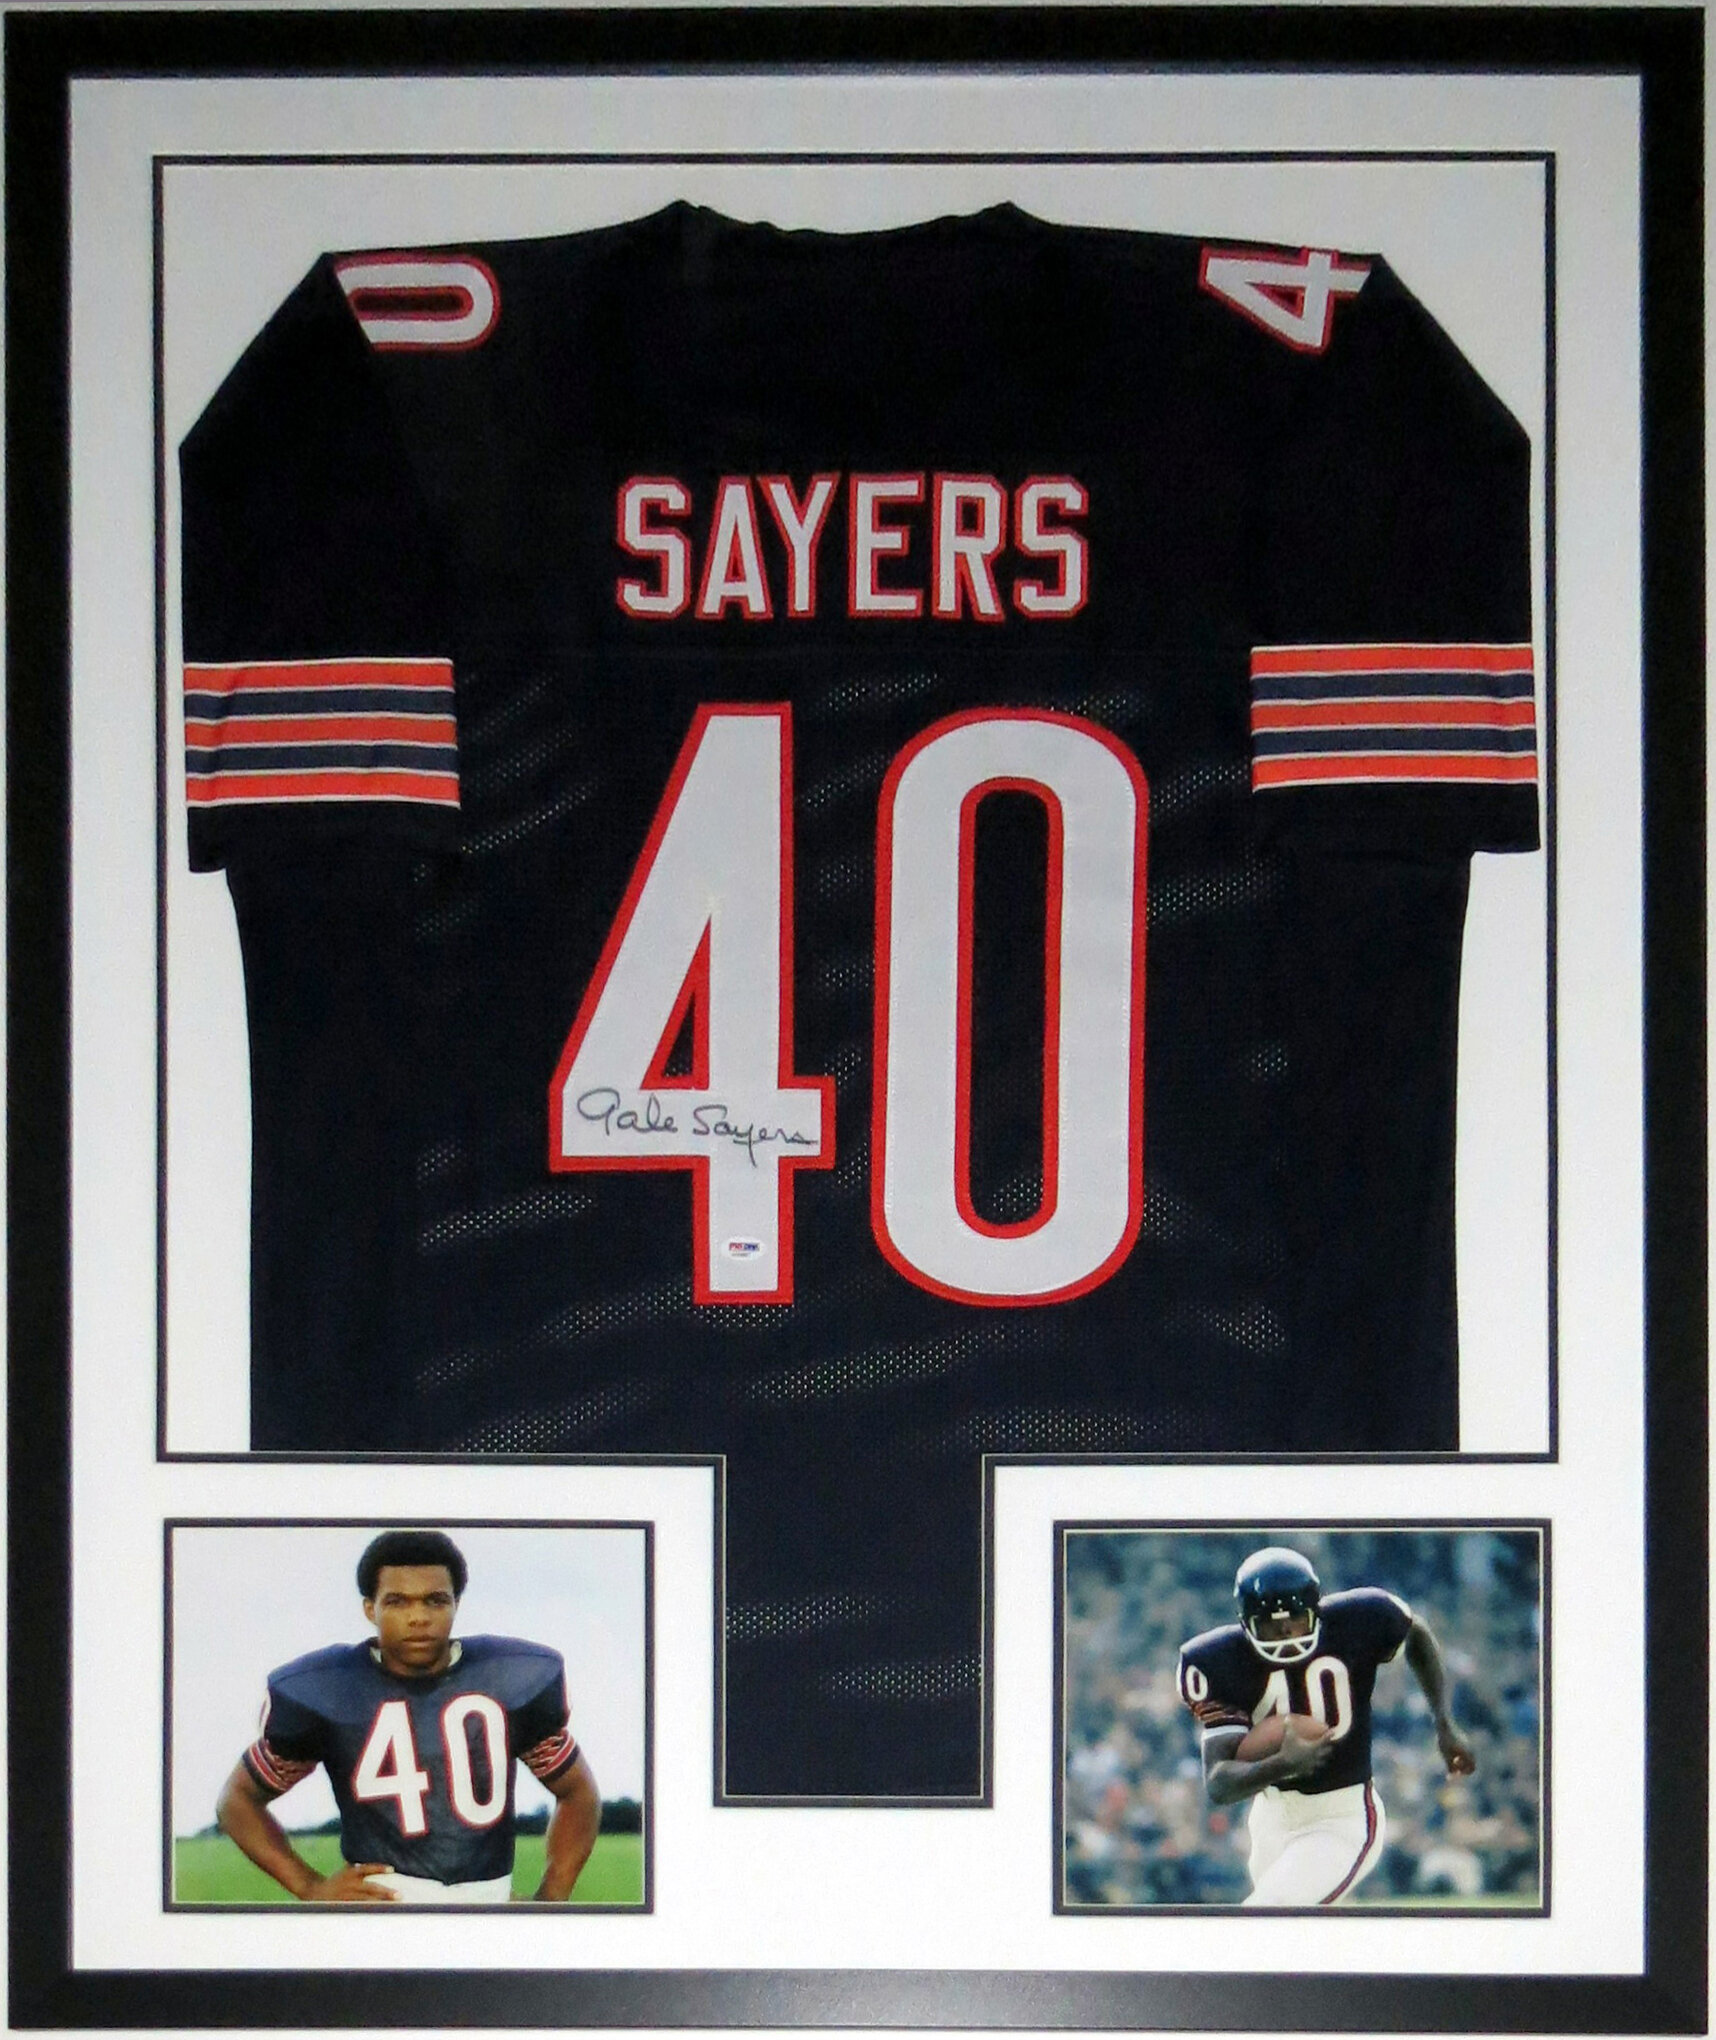 Chicago Bears Gale Sayers Autographed Blue JerseyHOF 77 PSA/DNA Stock #141210 